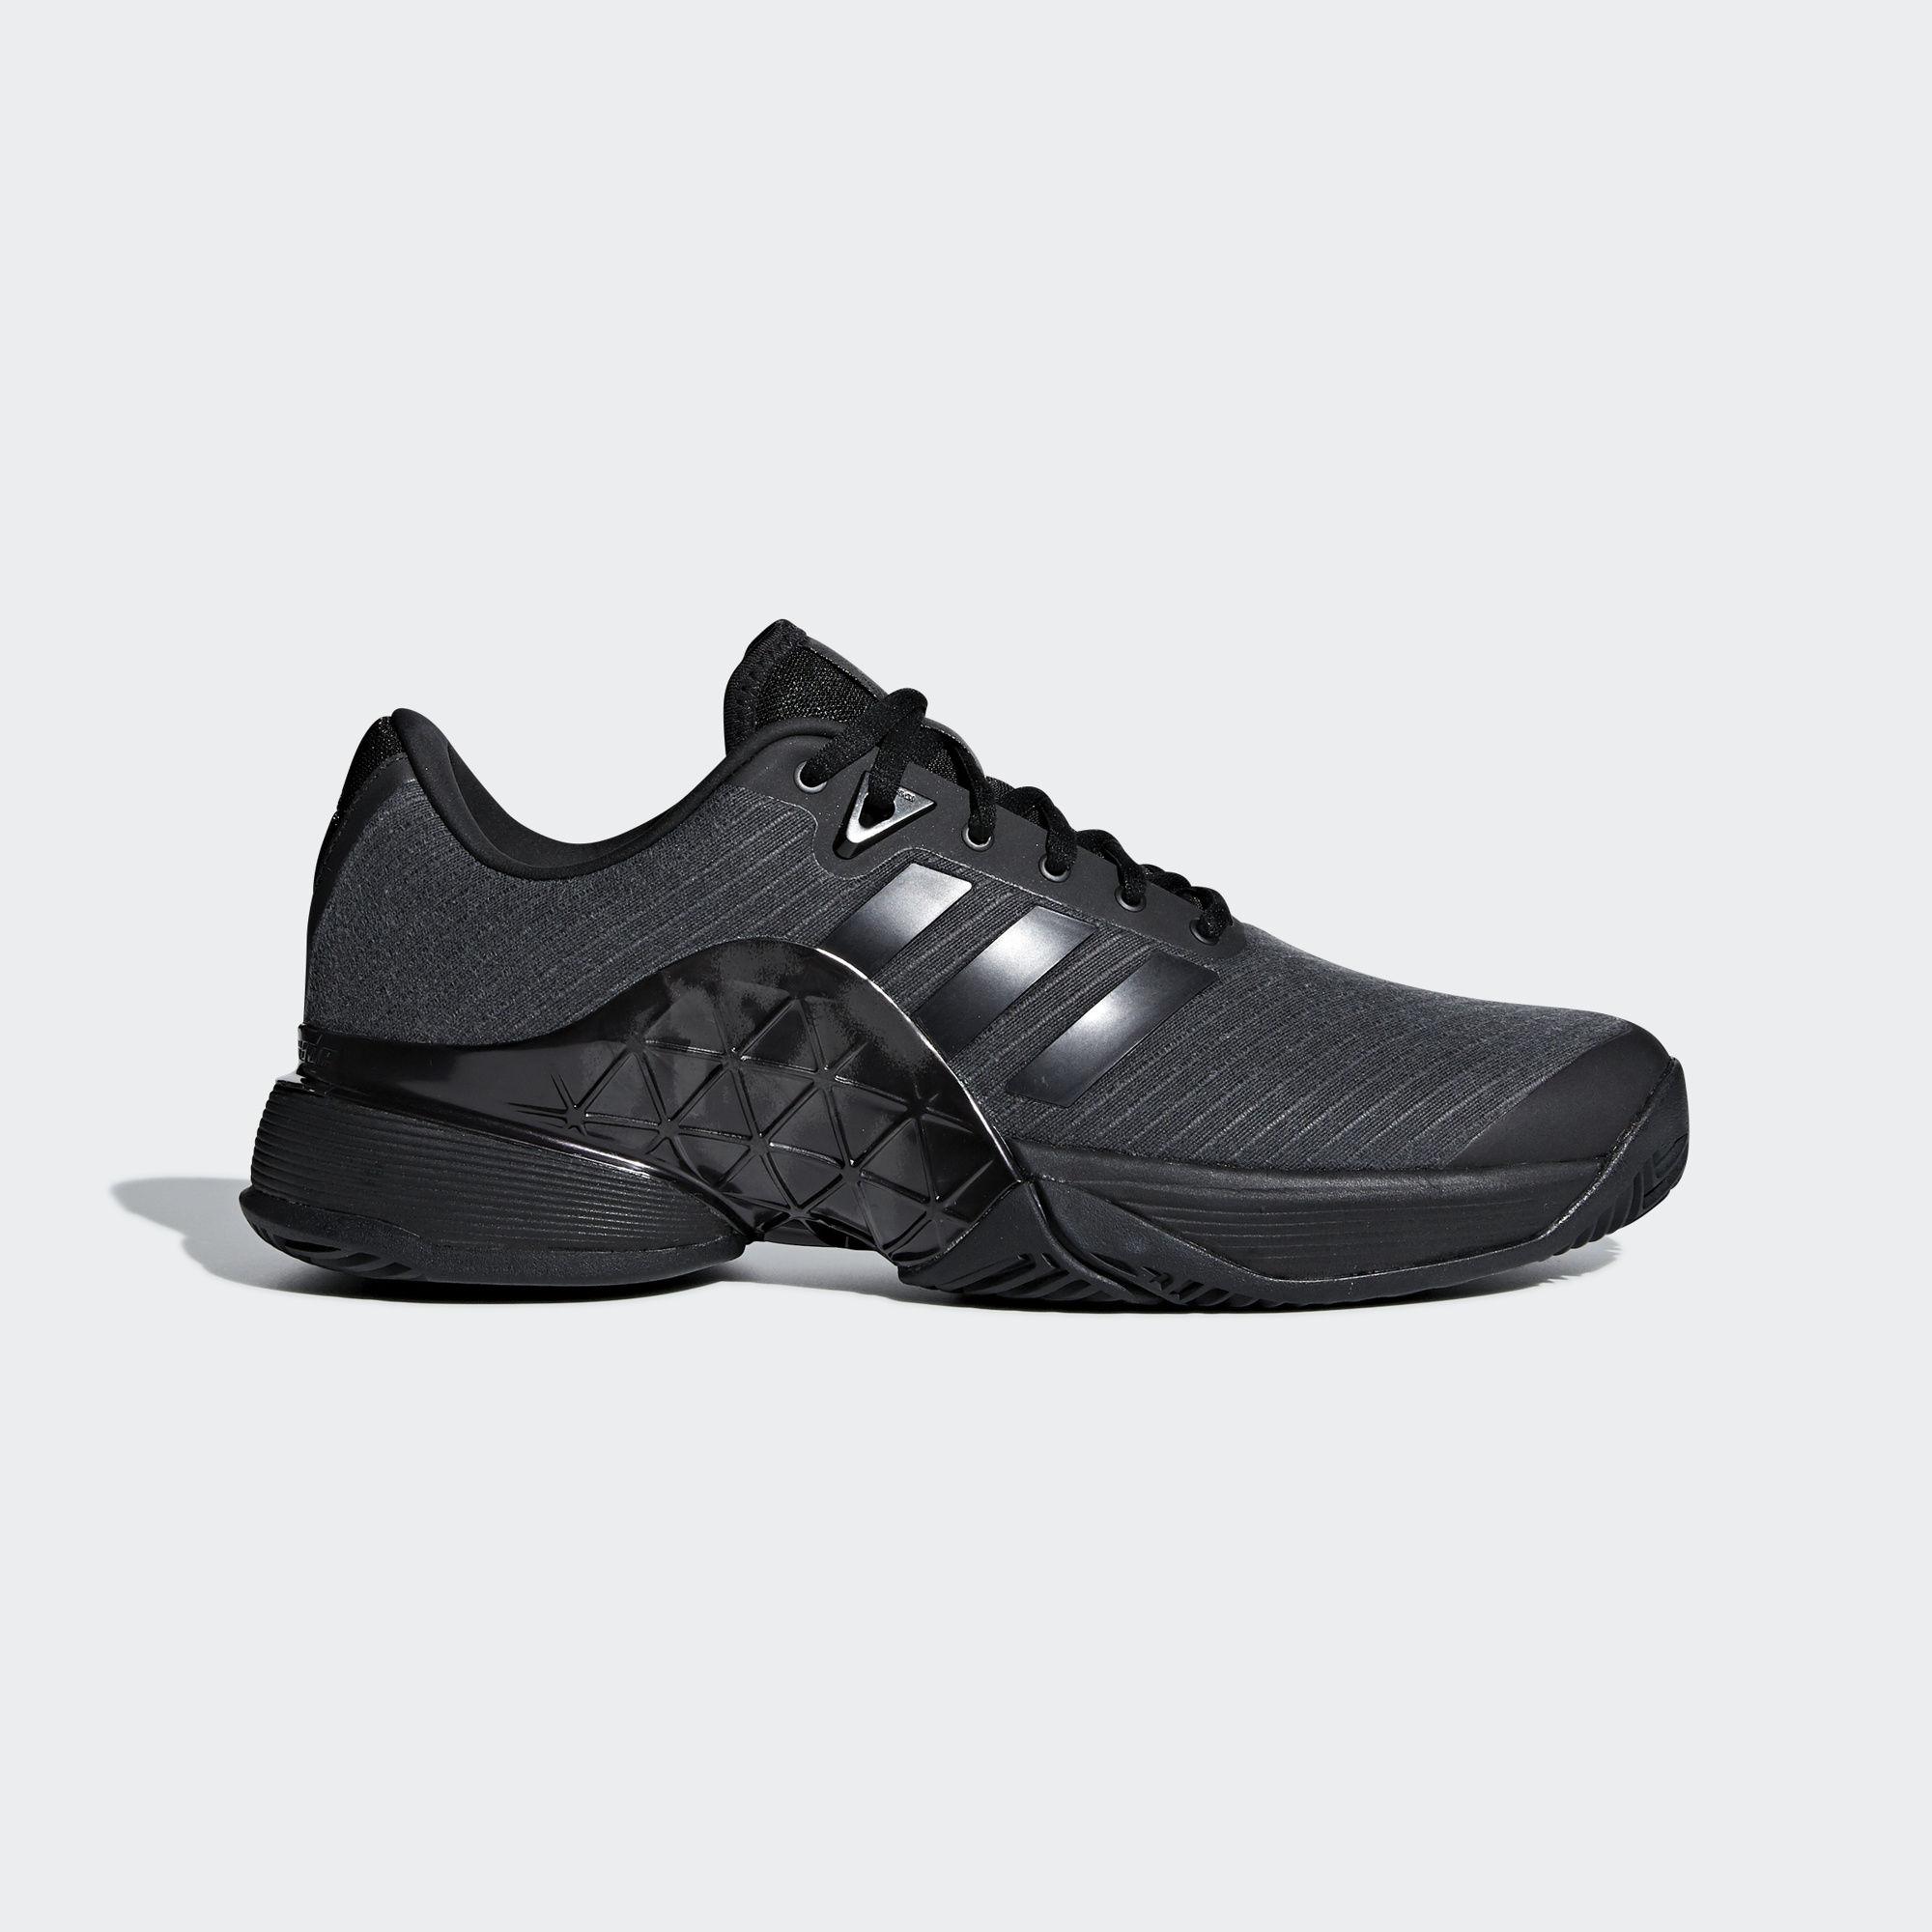 adidas sneakers limited edition 2018